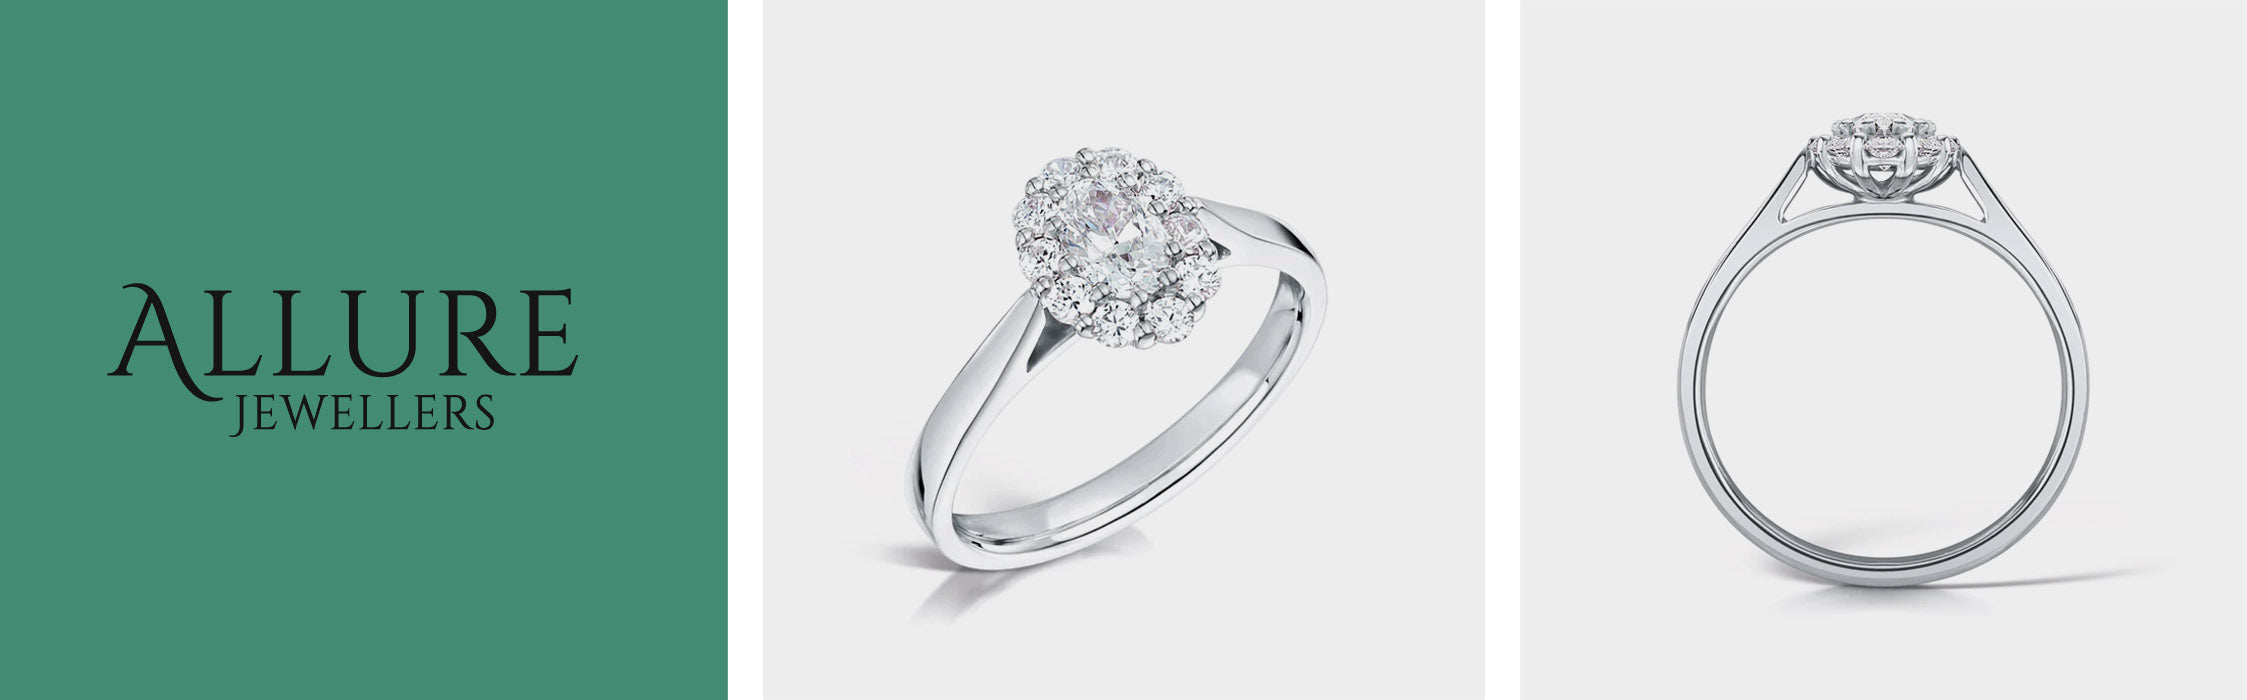 Halo diamond engagement rings at Allure Jewellers